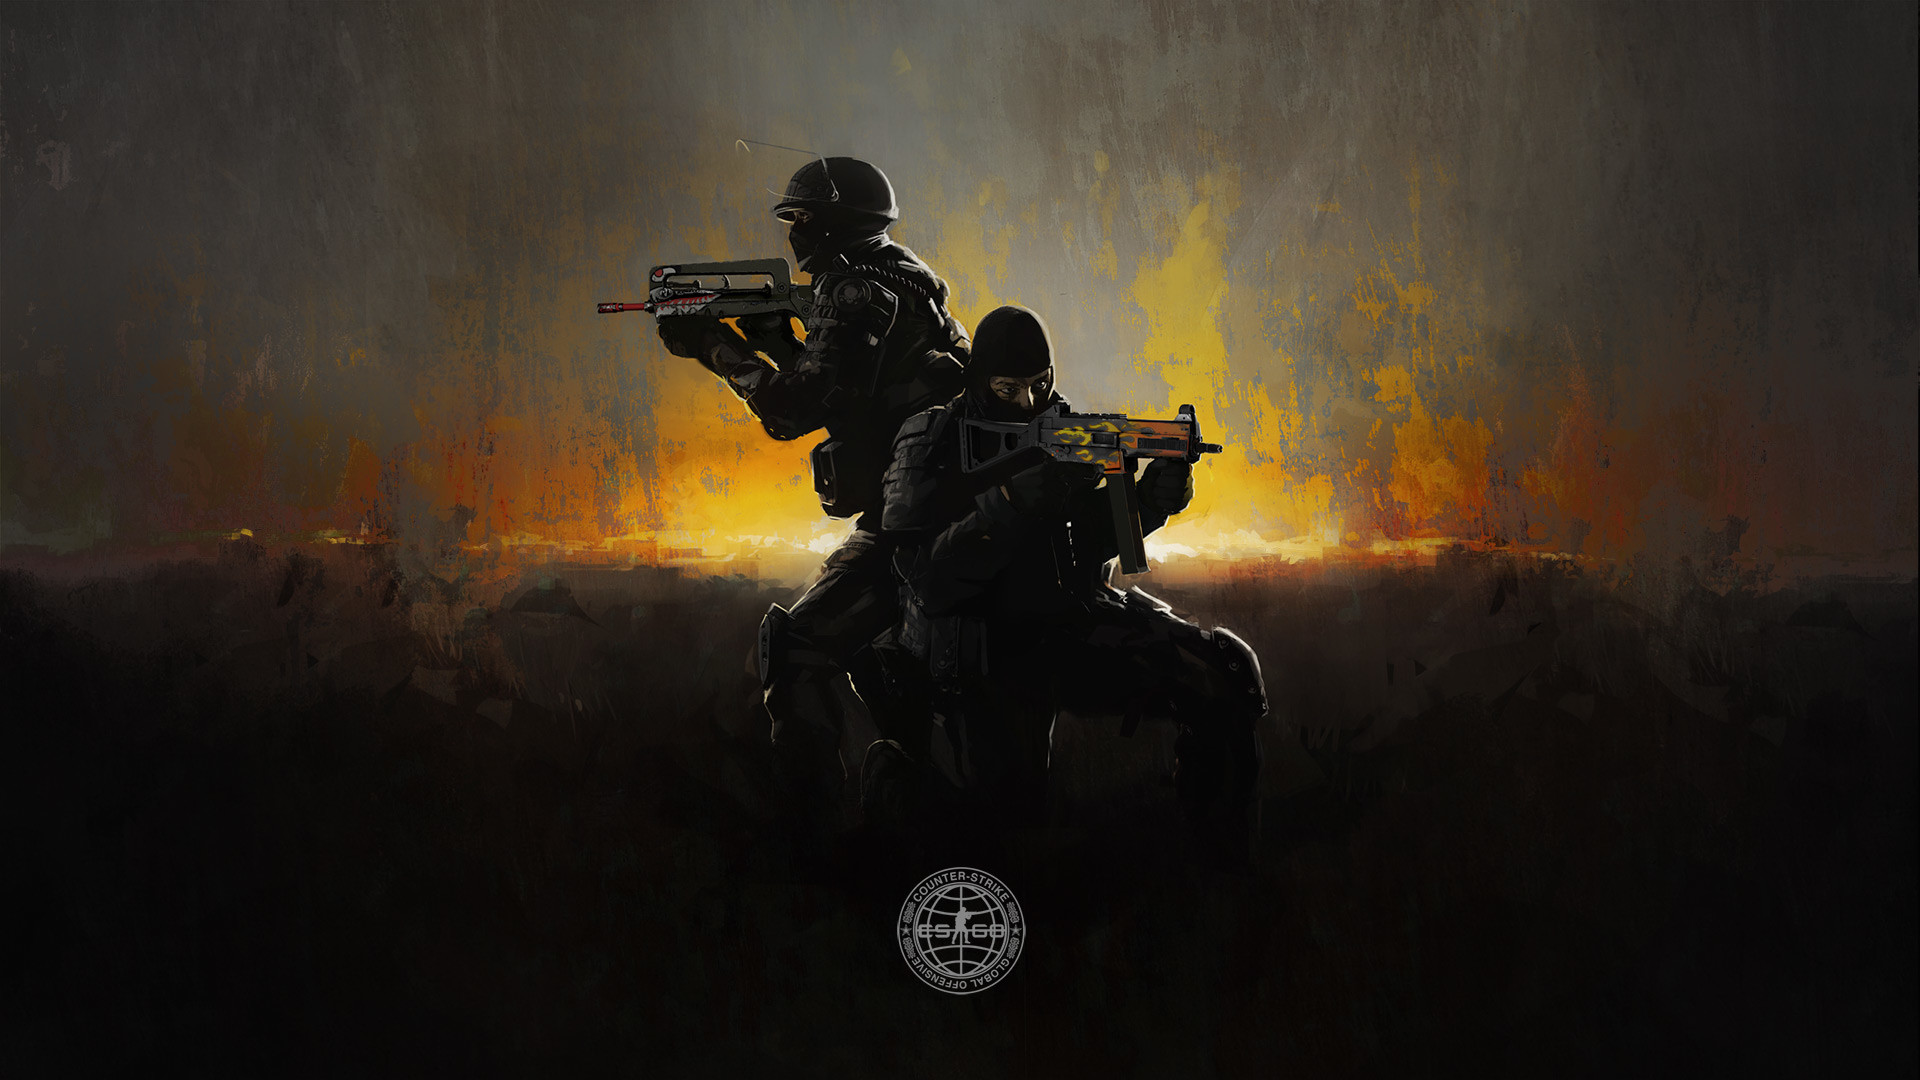 1280x2120 Cs Go 4k iPhone 6+ HD 4k Wallpapers, Images, Backgrounds